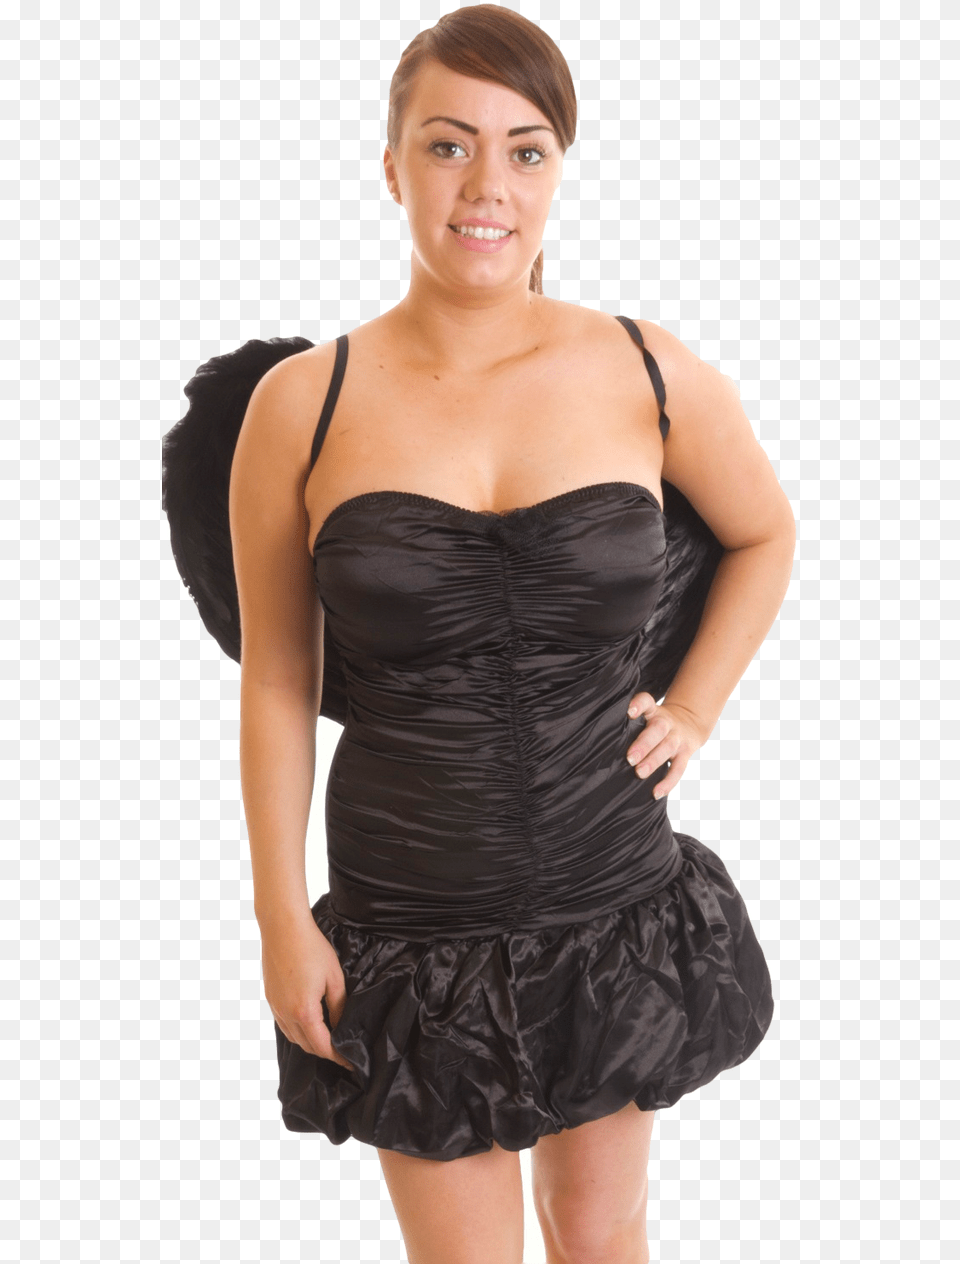 Click To View Full Size Image Junior Masterchef Australia Winner, Adult, Person, Formal Wear, Female Png